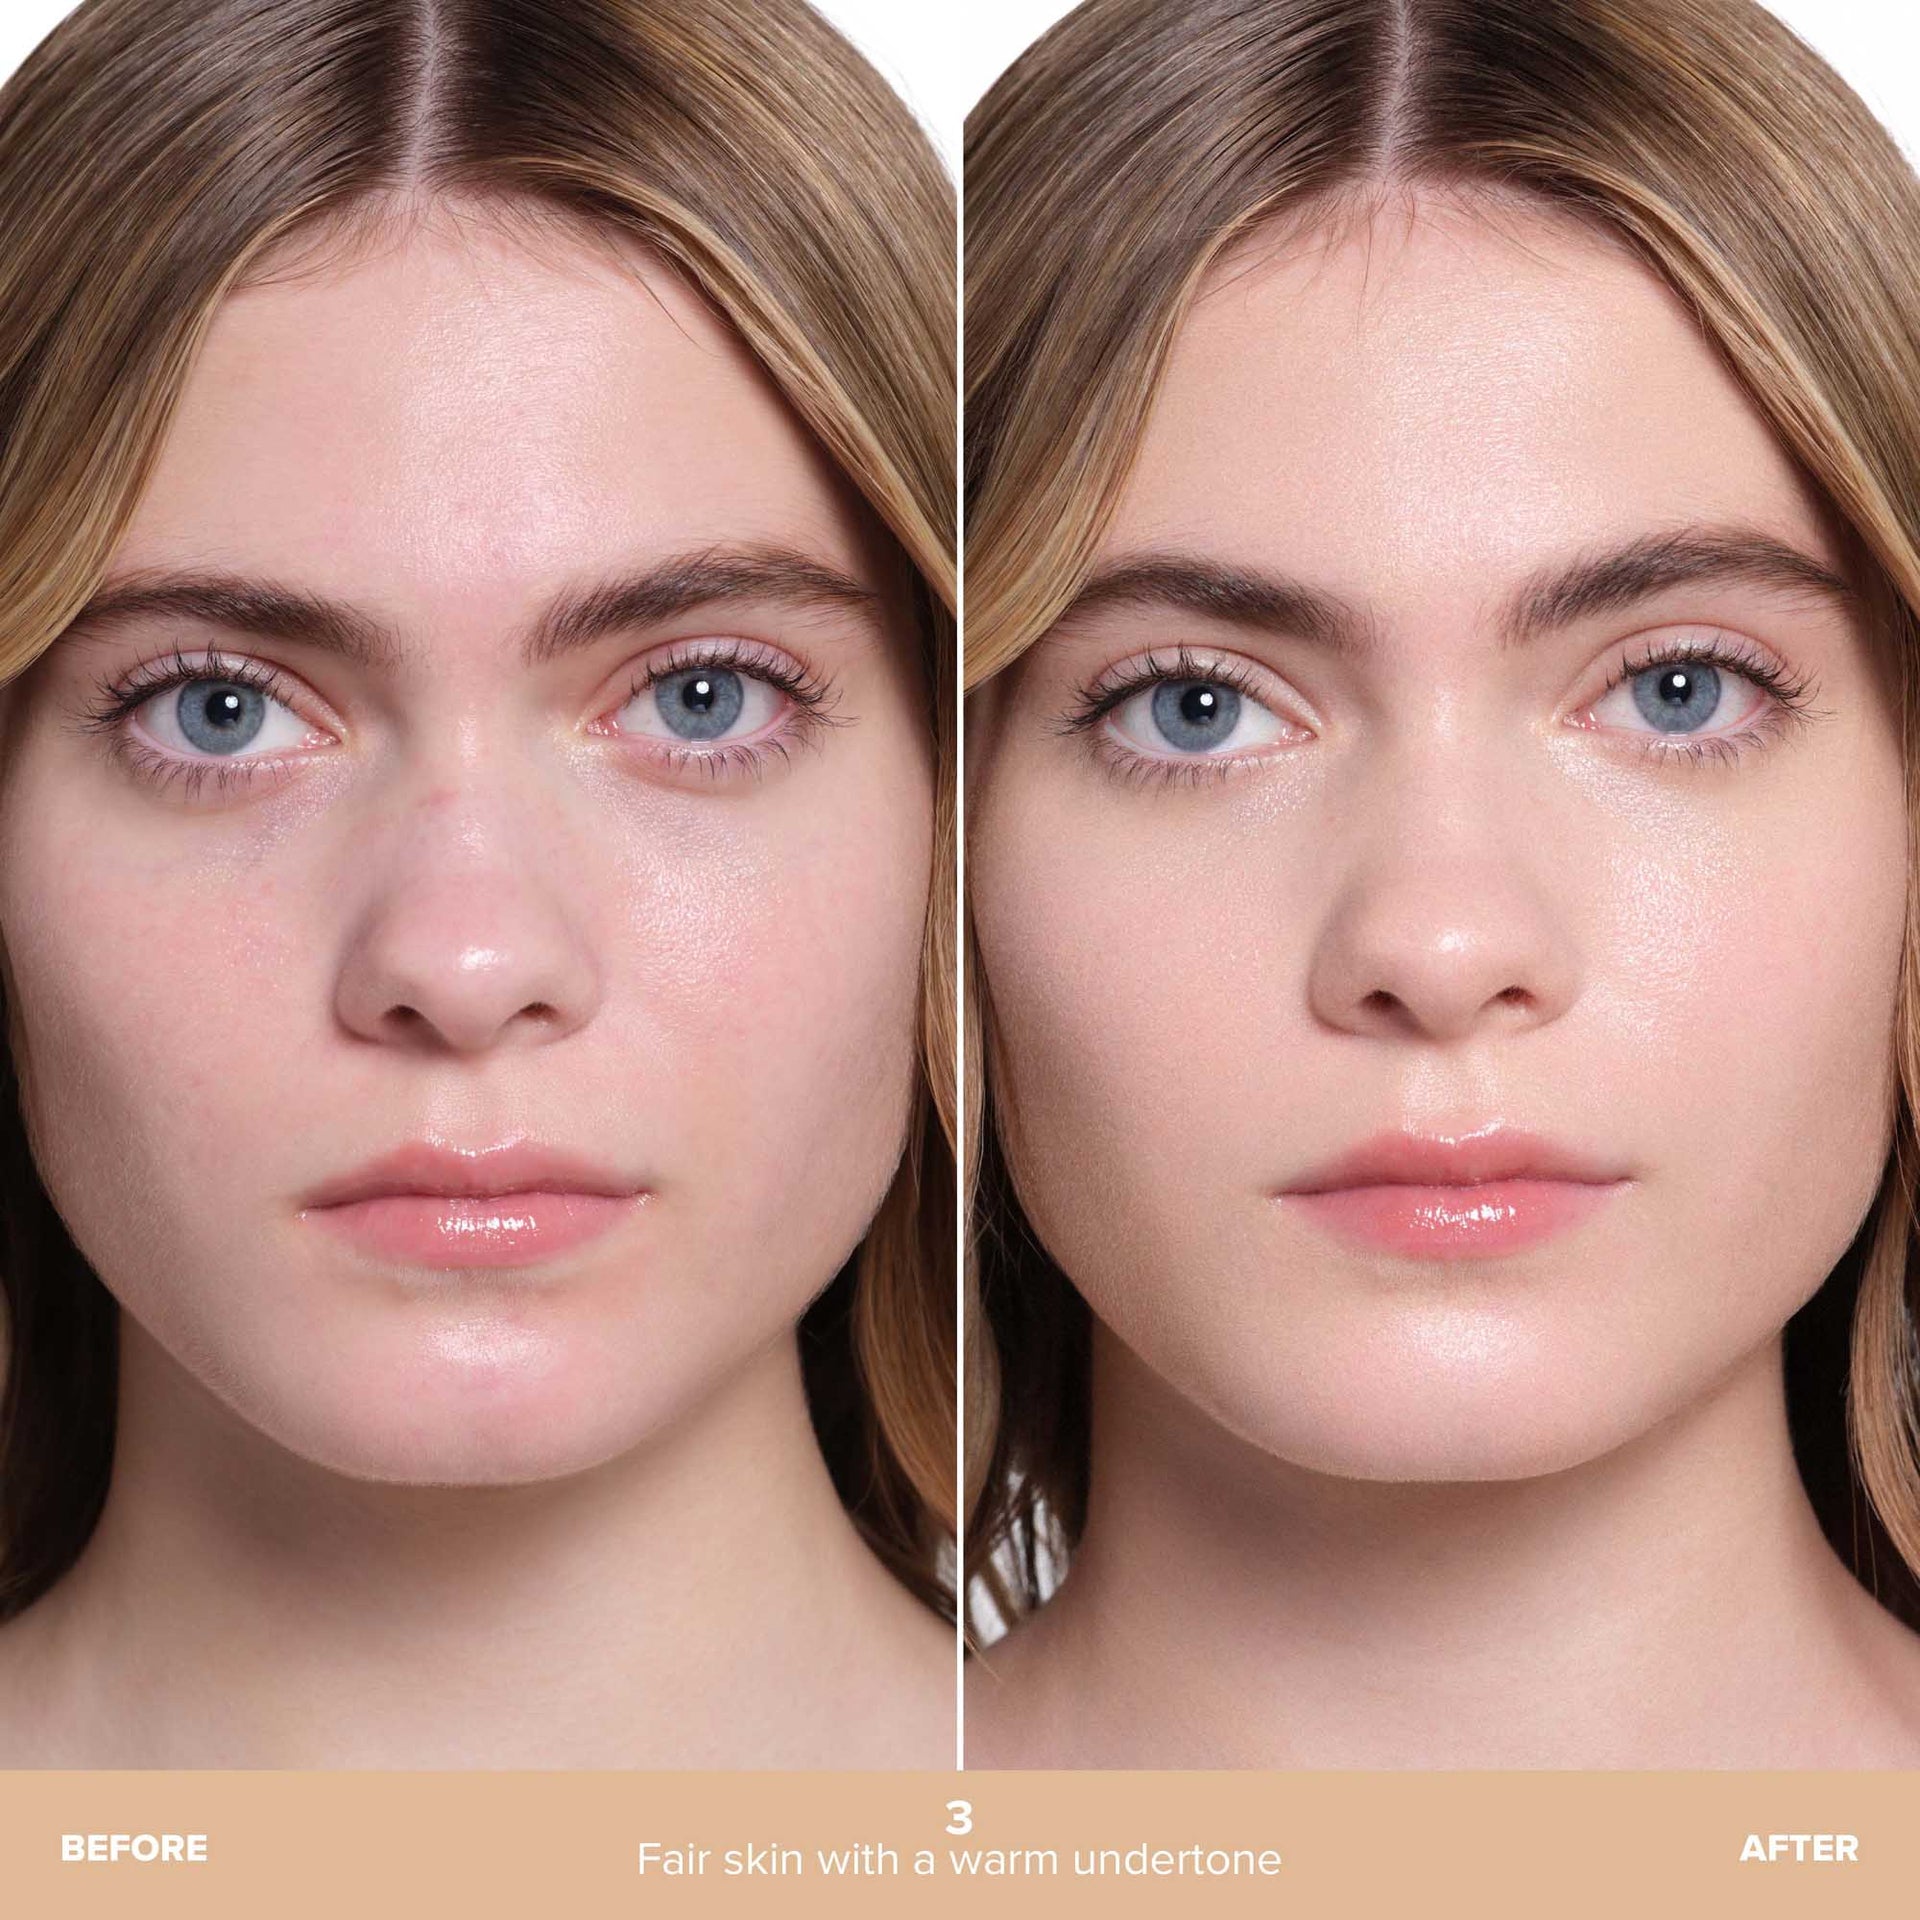 Shade 3 | Beauty Balm Serum Boosted Skin Tint Before & After - Shade 3